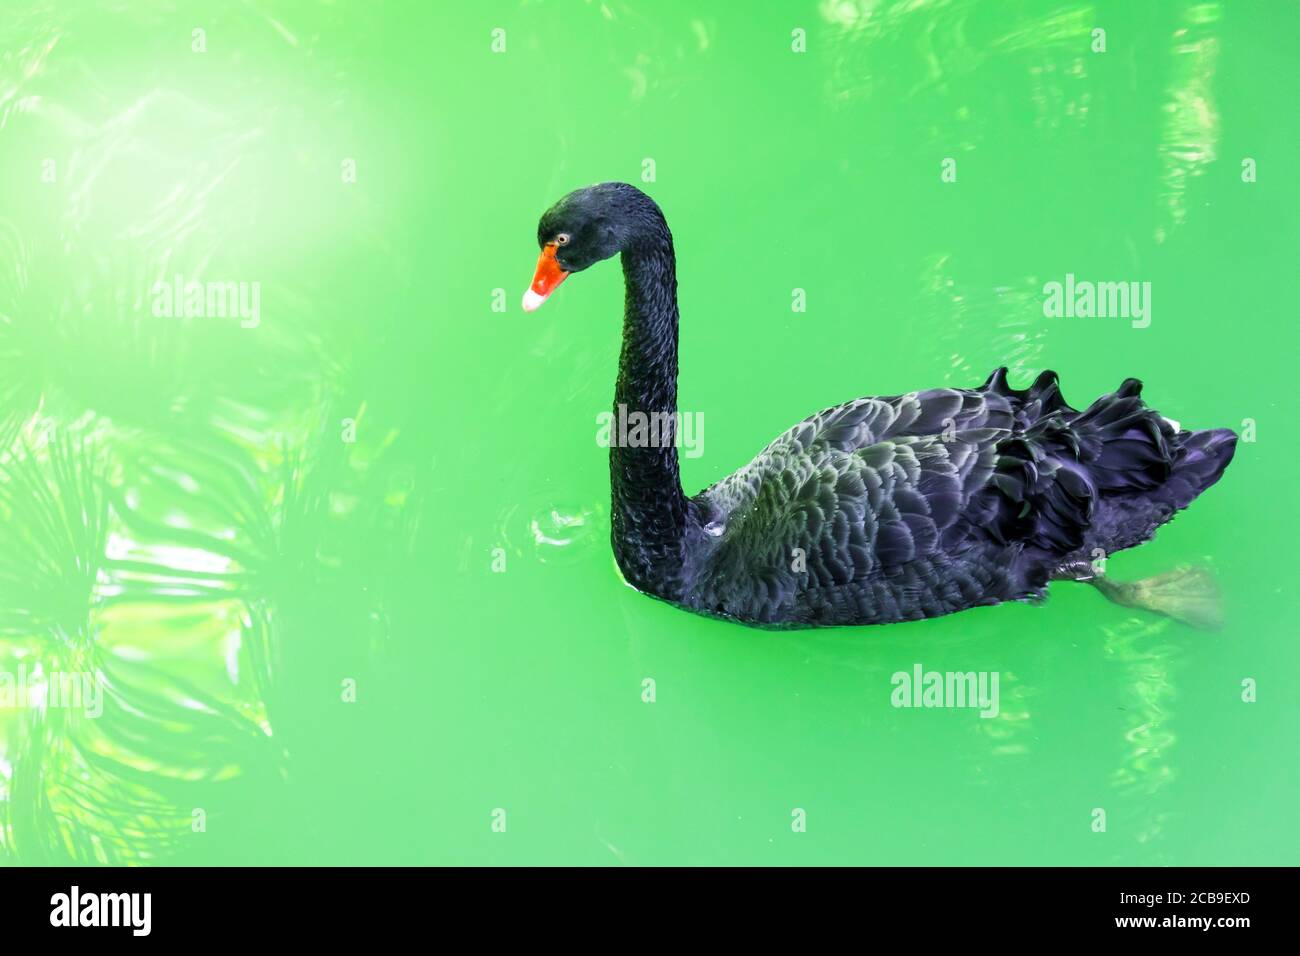 Black swan in a tropical pond with green turquoise water Stock Photo